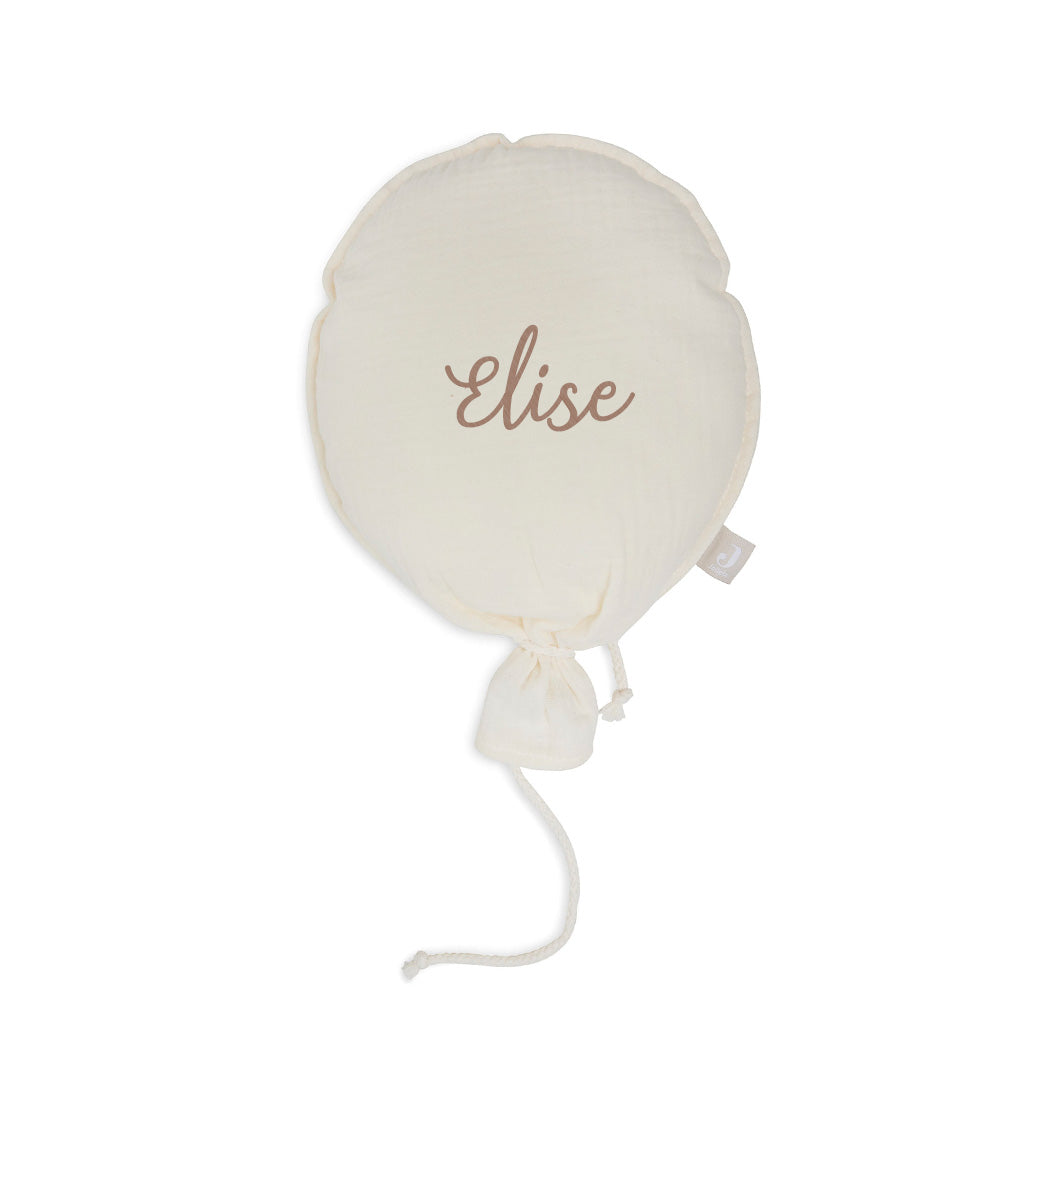 Balloon tetra // ivory (option:embroidery with name)